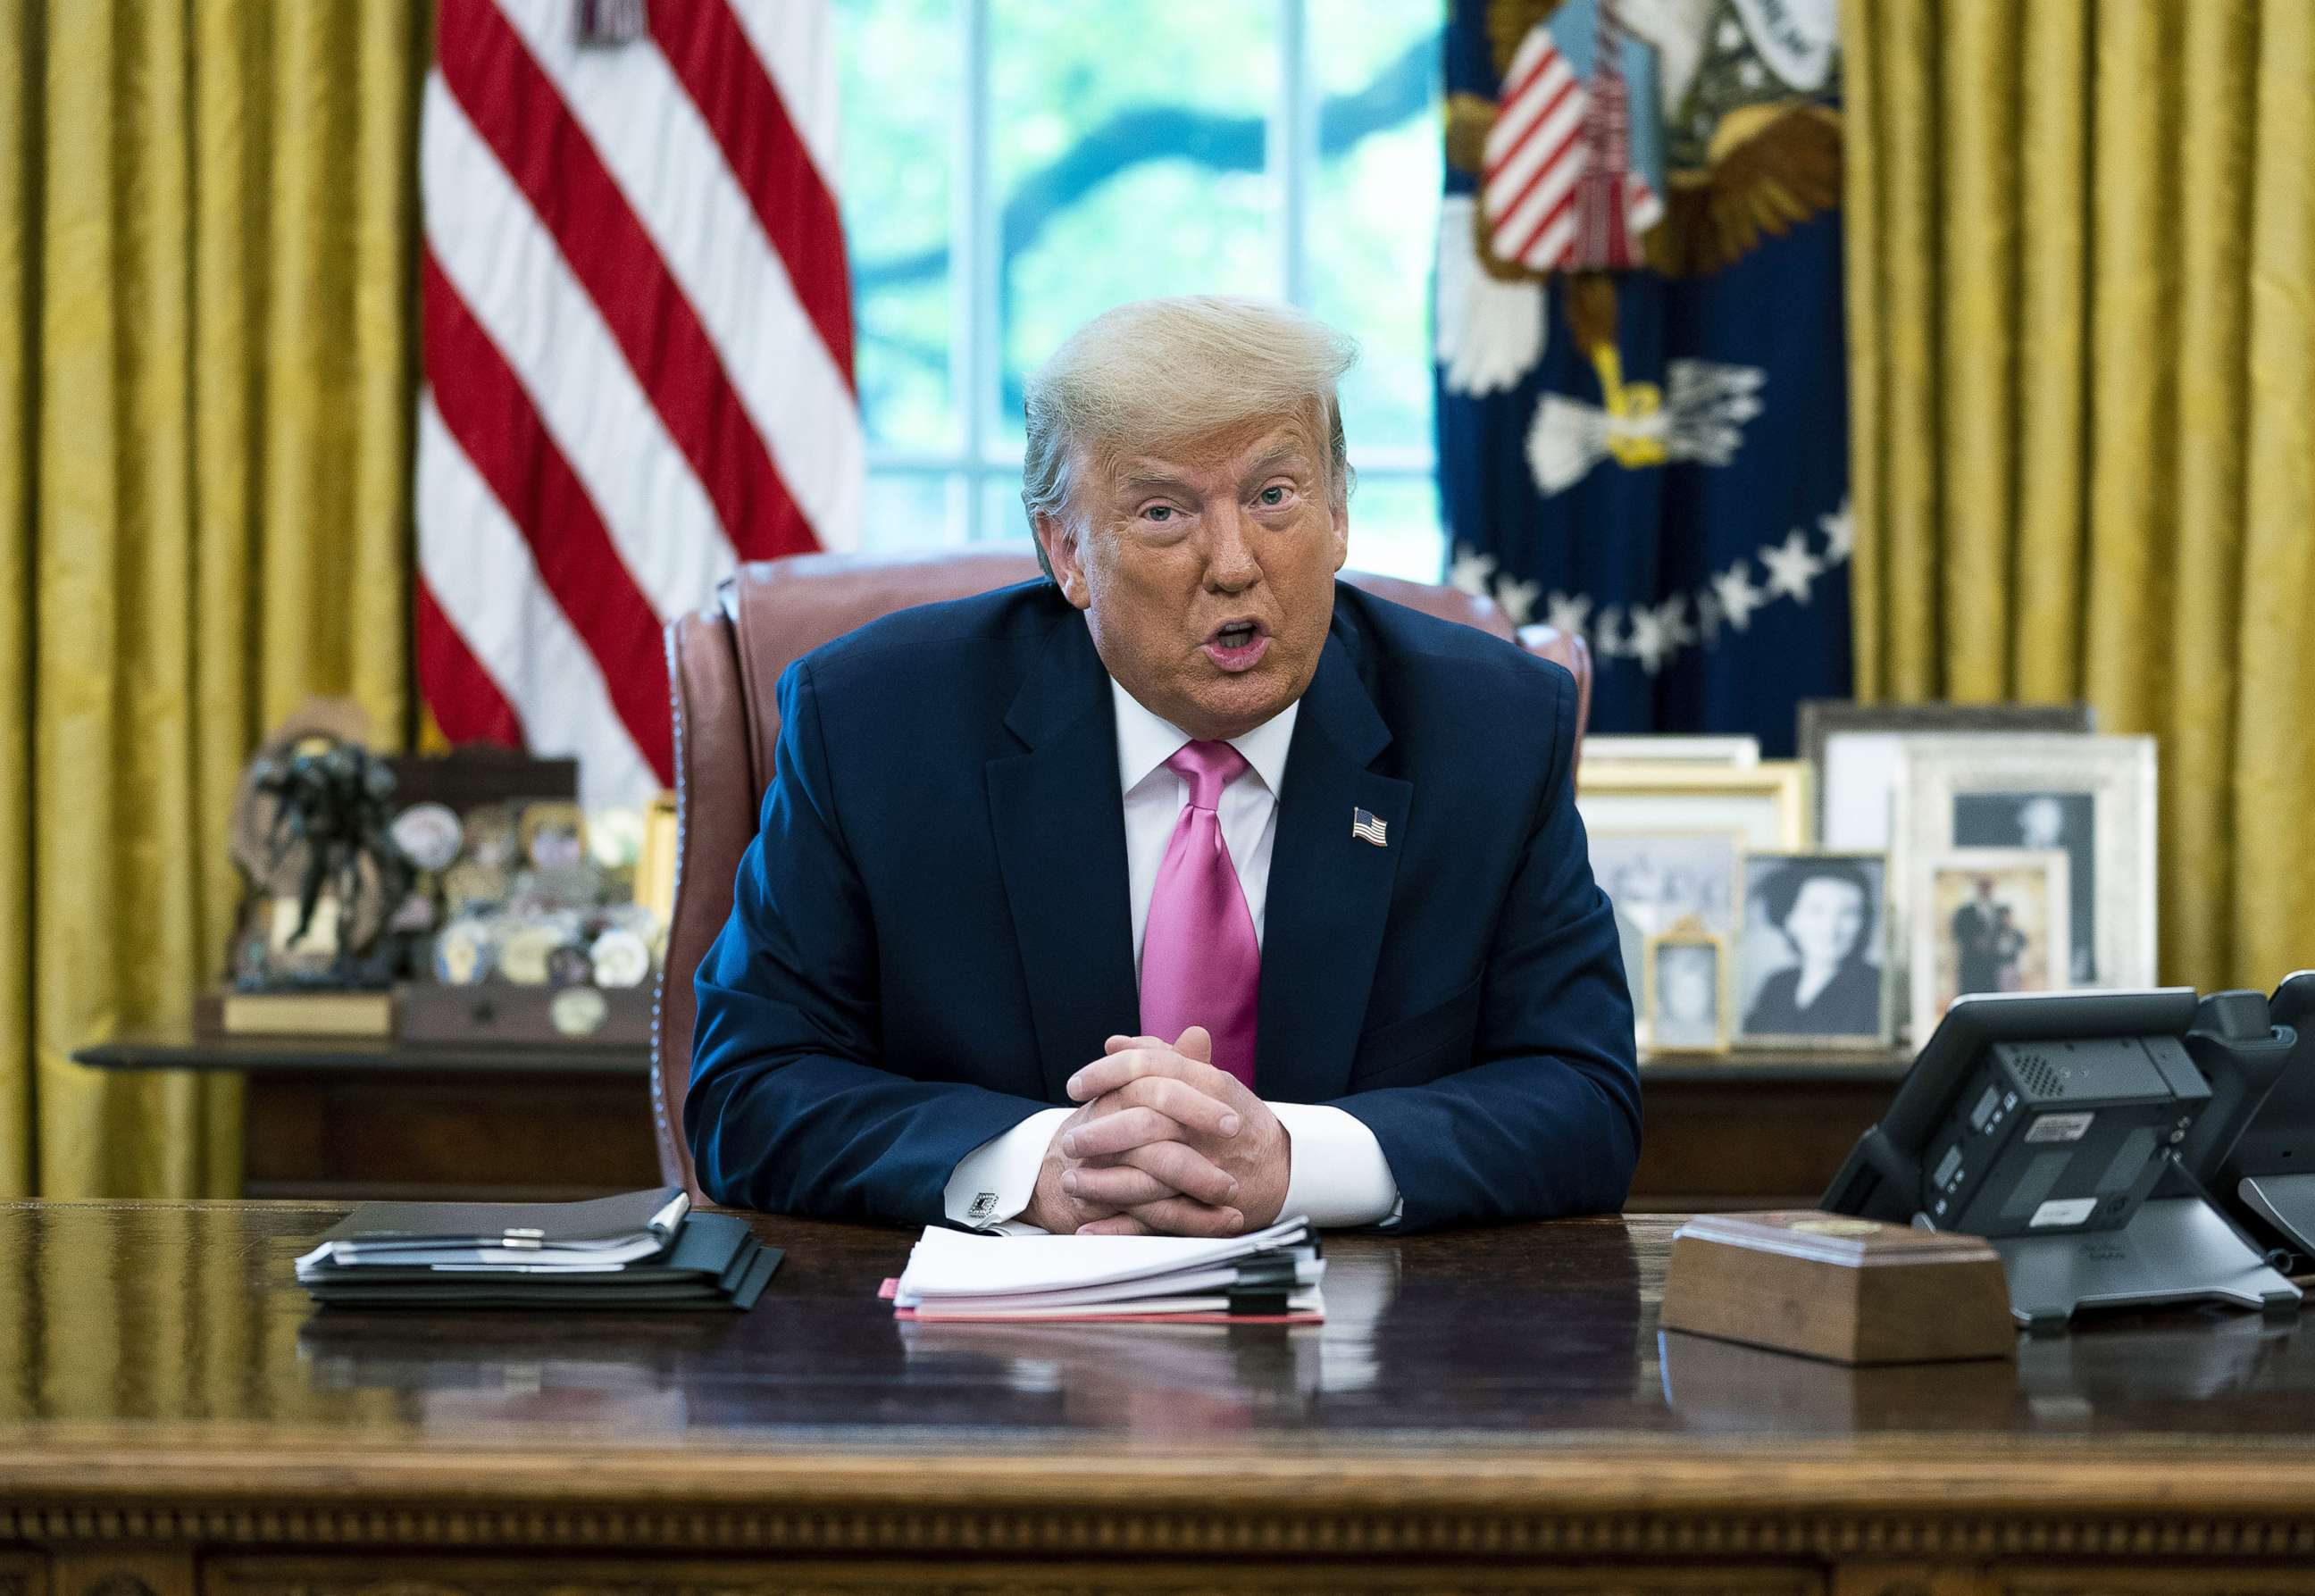 PHOTO: President Donald Trump talks to reporters while hosting Republican Congressional leaders and members of his cabinet in the Oval Office at the White House July 20, 2020.